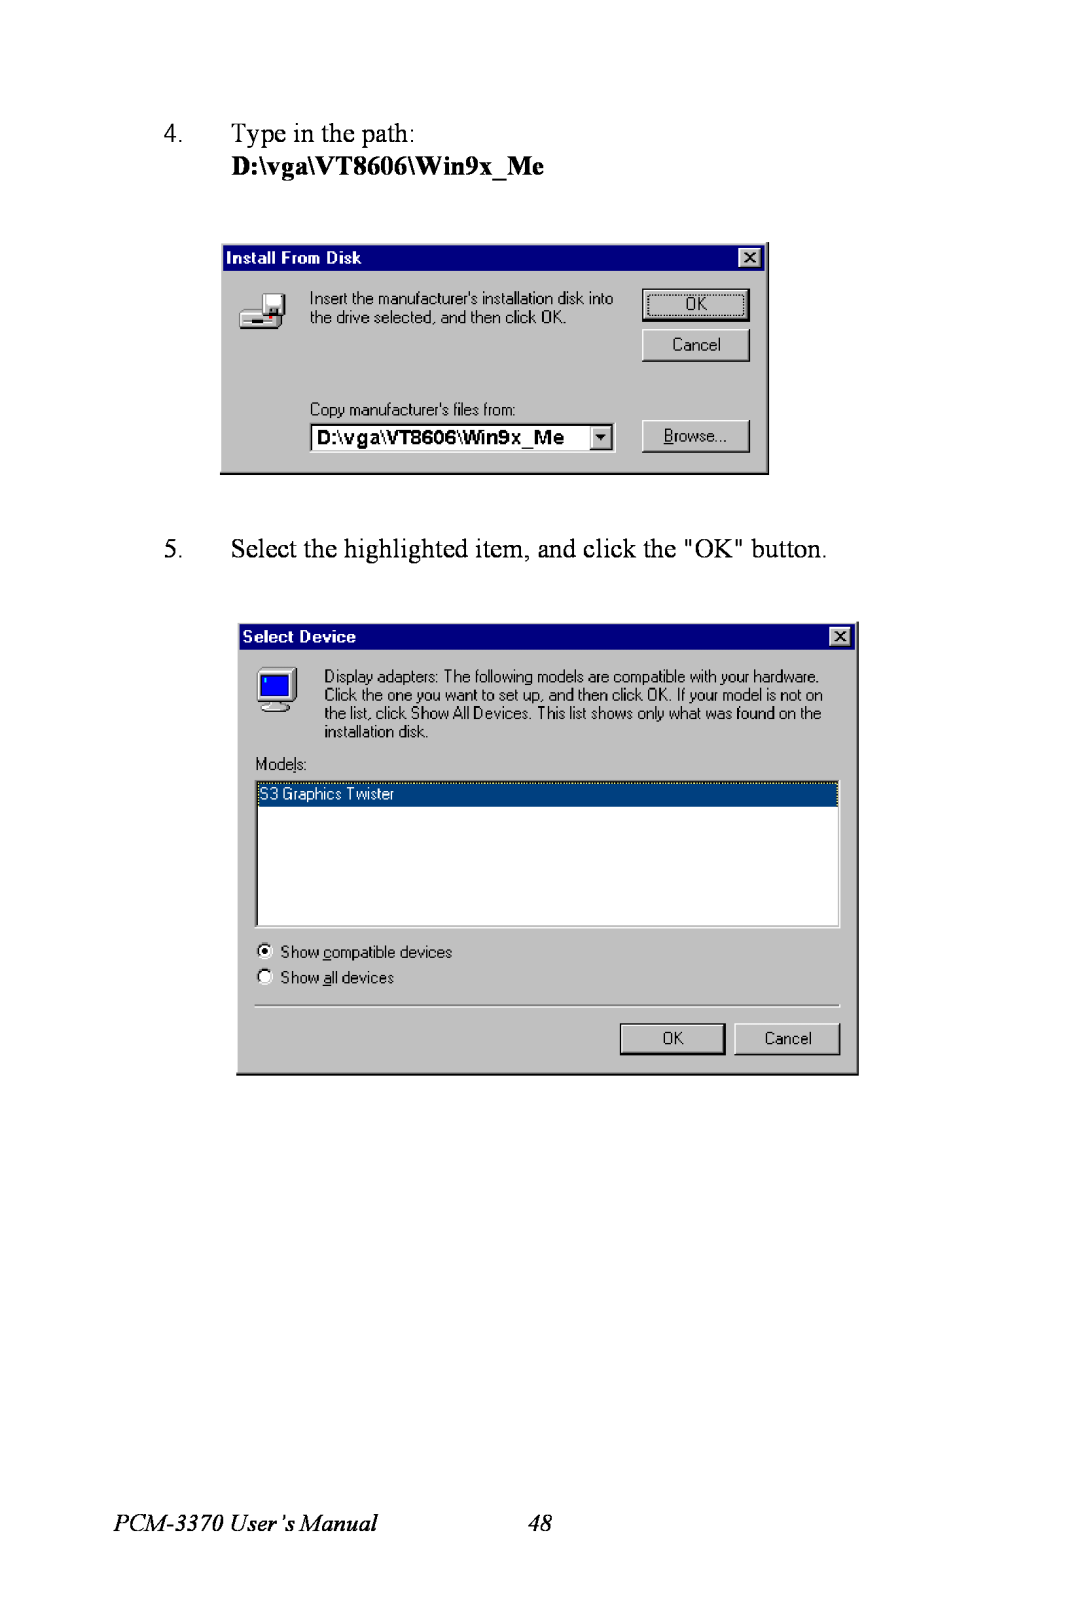 Intel PCM-3370 user manual D\vga\VT8606\Win9xMe, Type in the path, Select the highlighted item, and click the OK button 